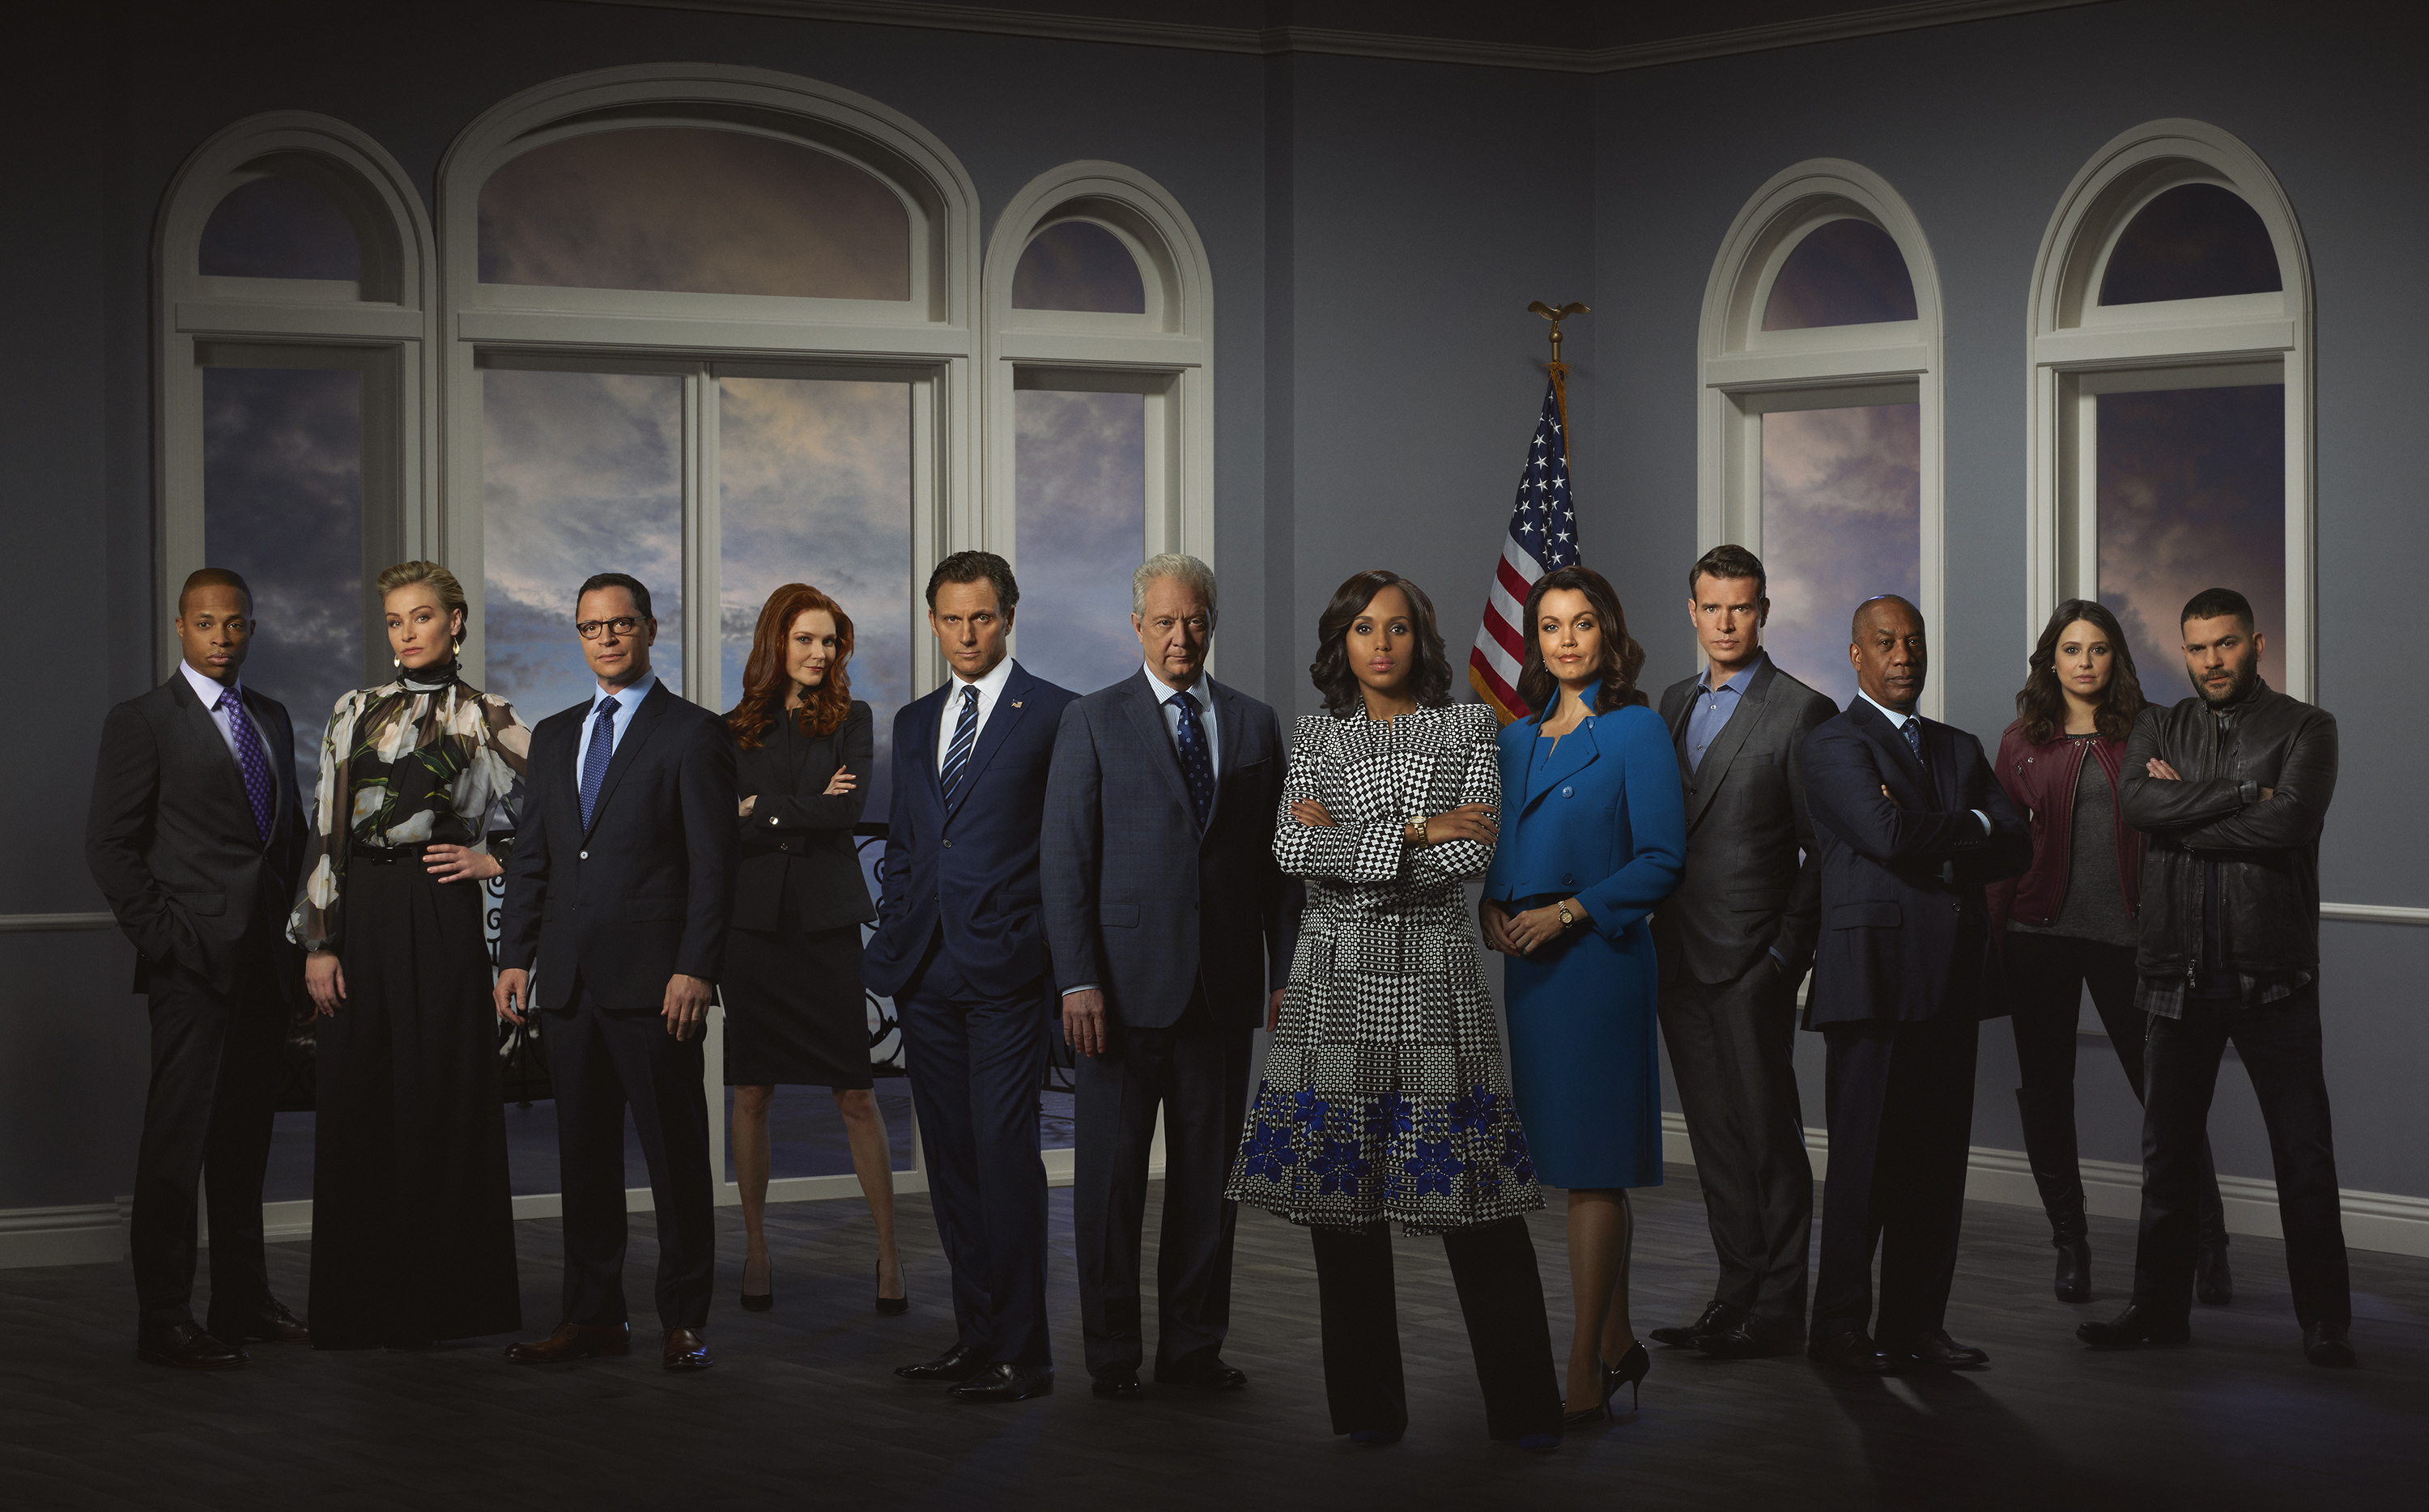 scandal abc characters